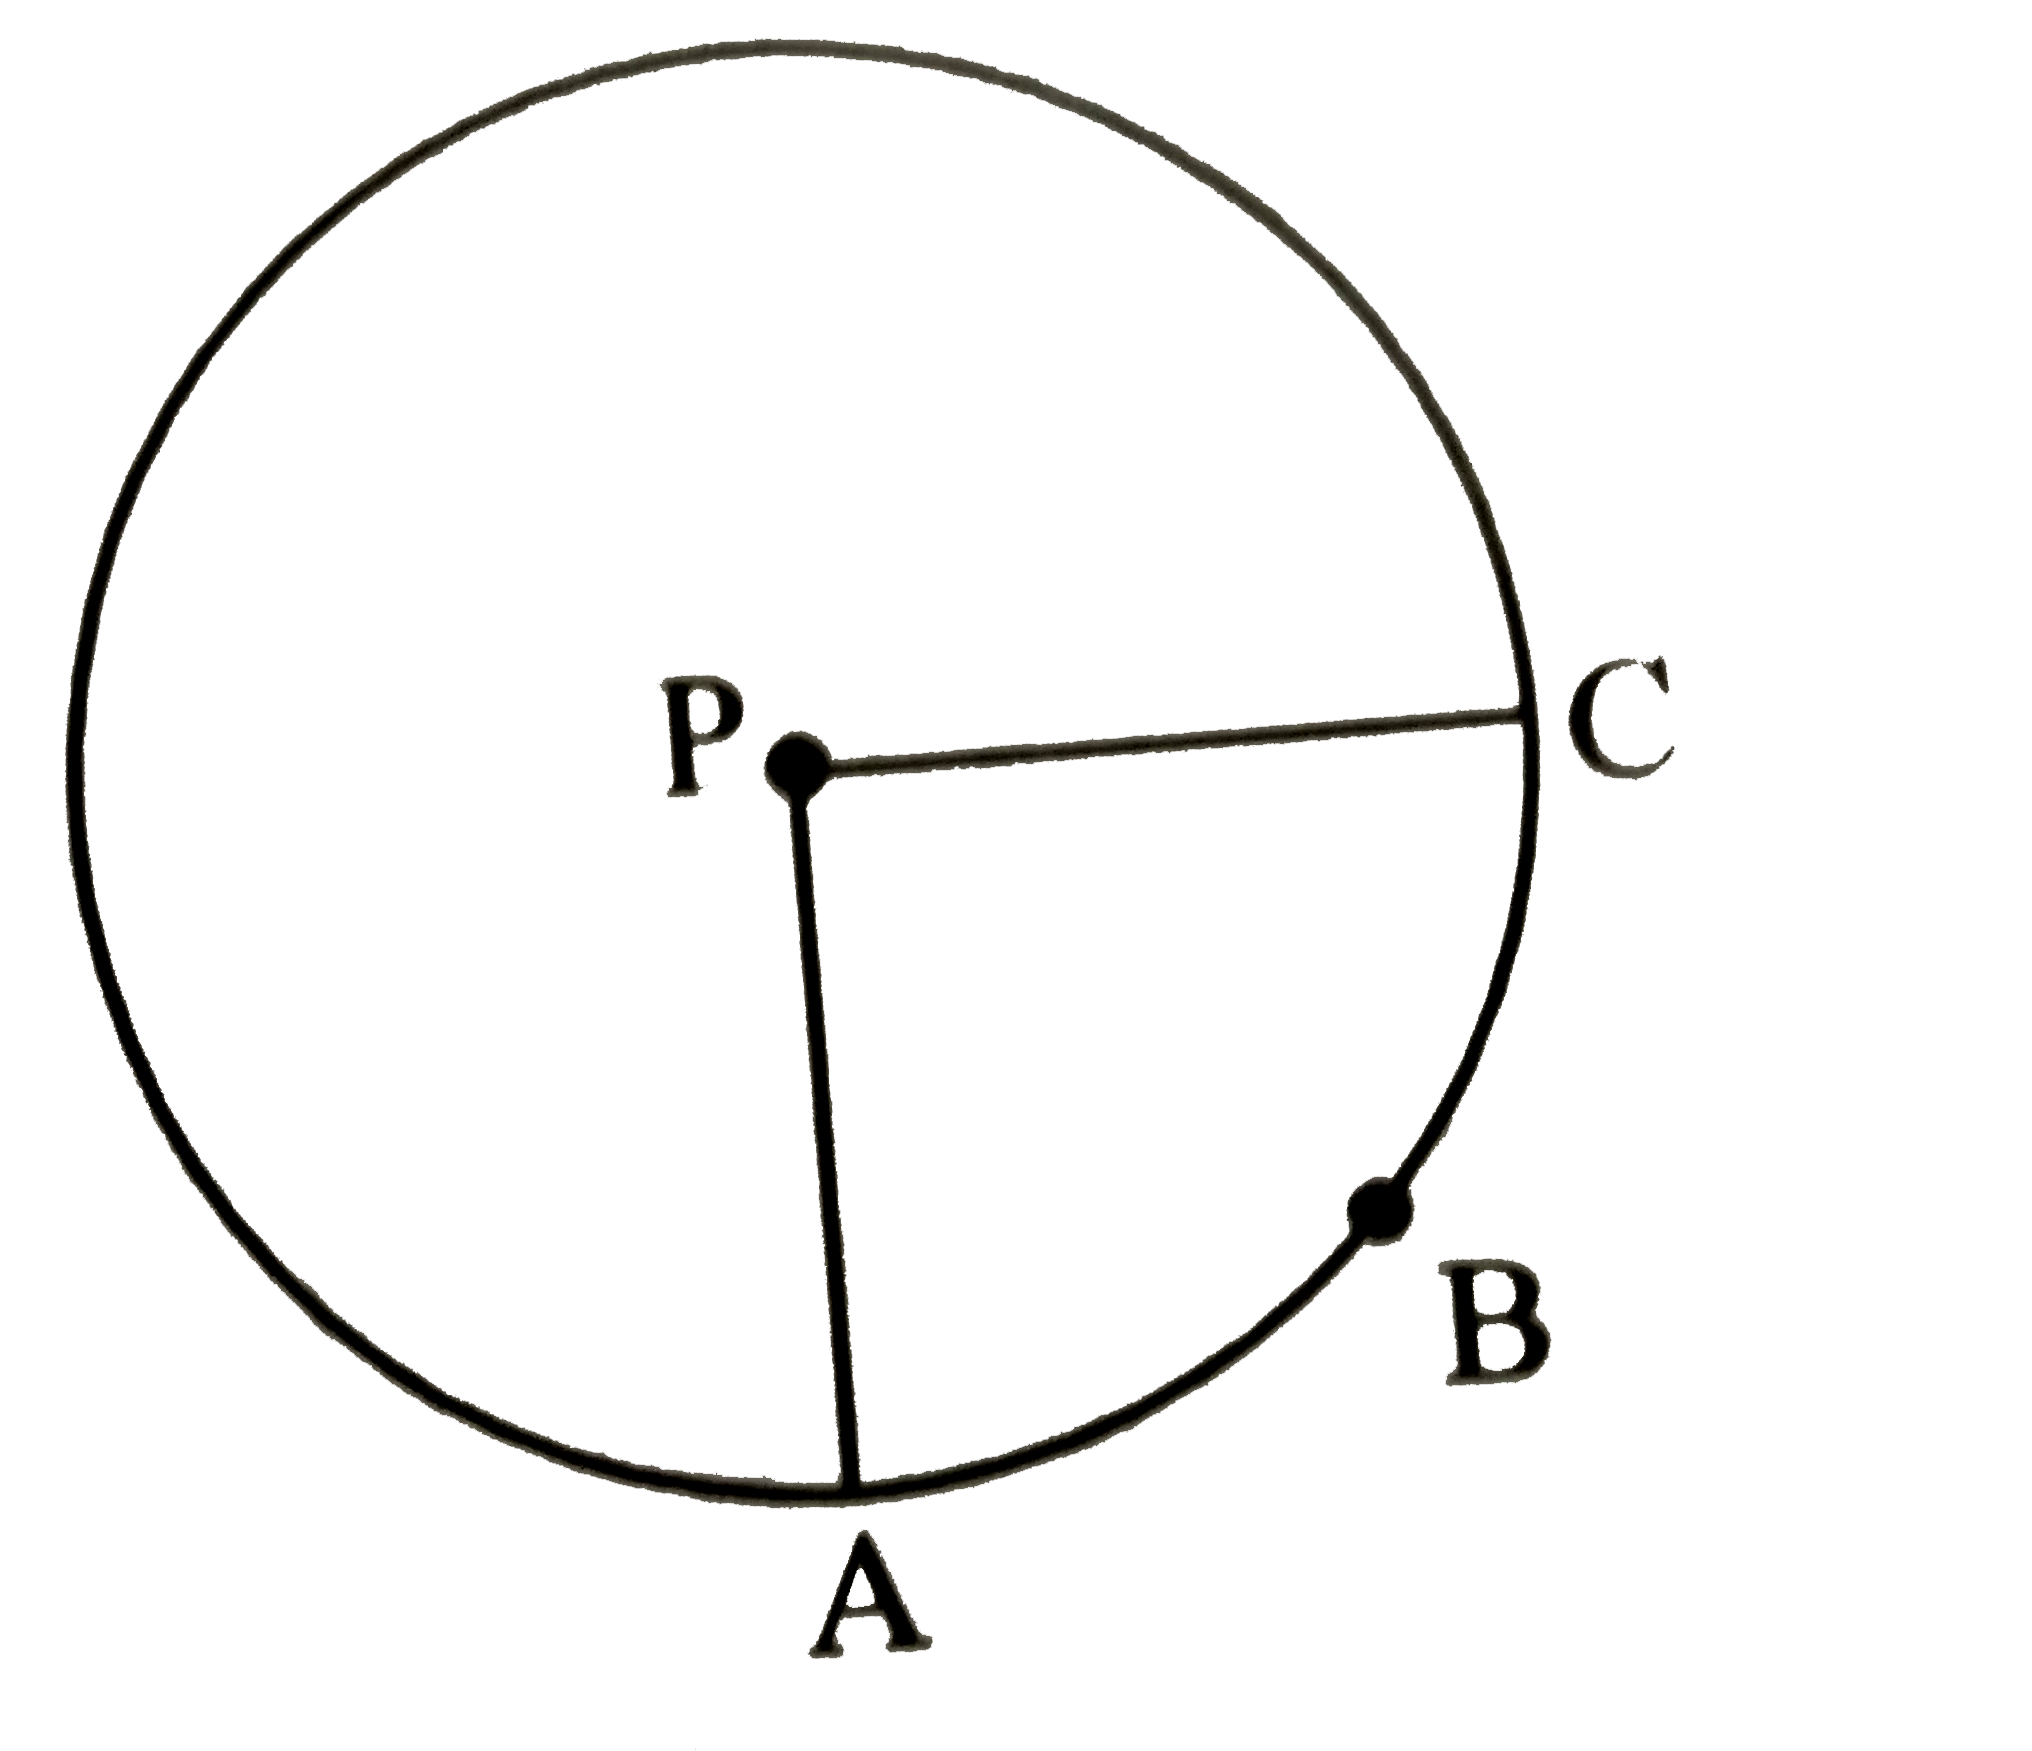 In the adjoining figure, if A(P-ABC) = 154 cm^(2)radius of the circle is 14 cm, find      angle APC,